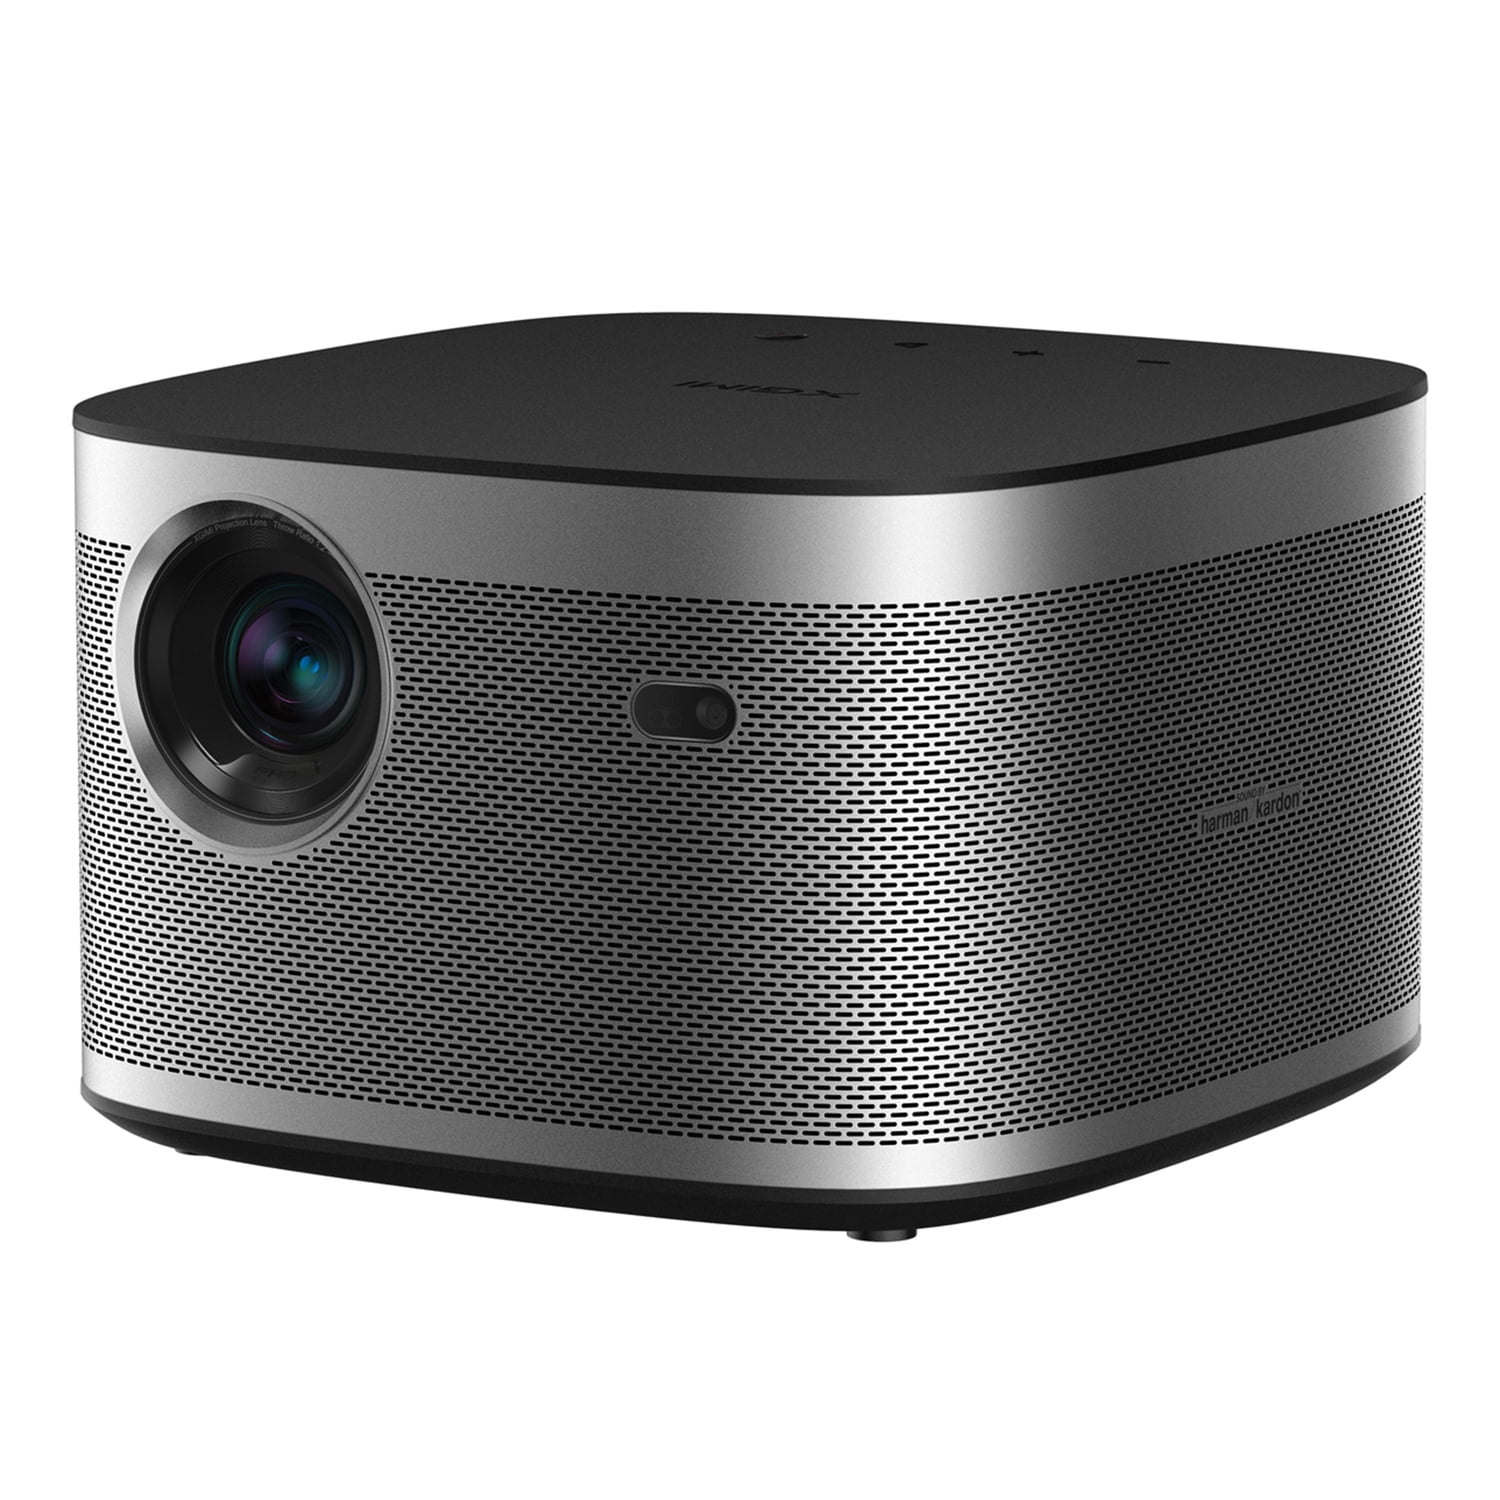 XGIMI - HORIZON Projector Home Smart Speaker Kardon Dark - with Android Harman Silver TV FHD and